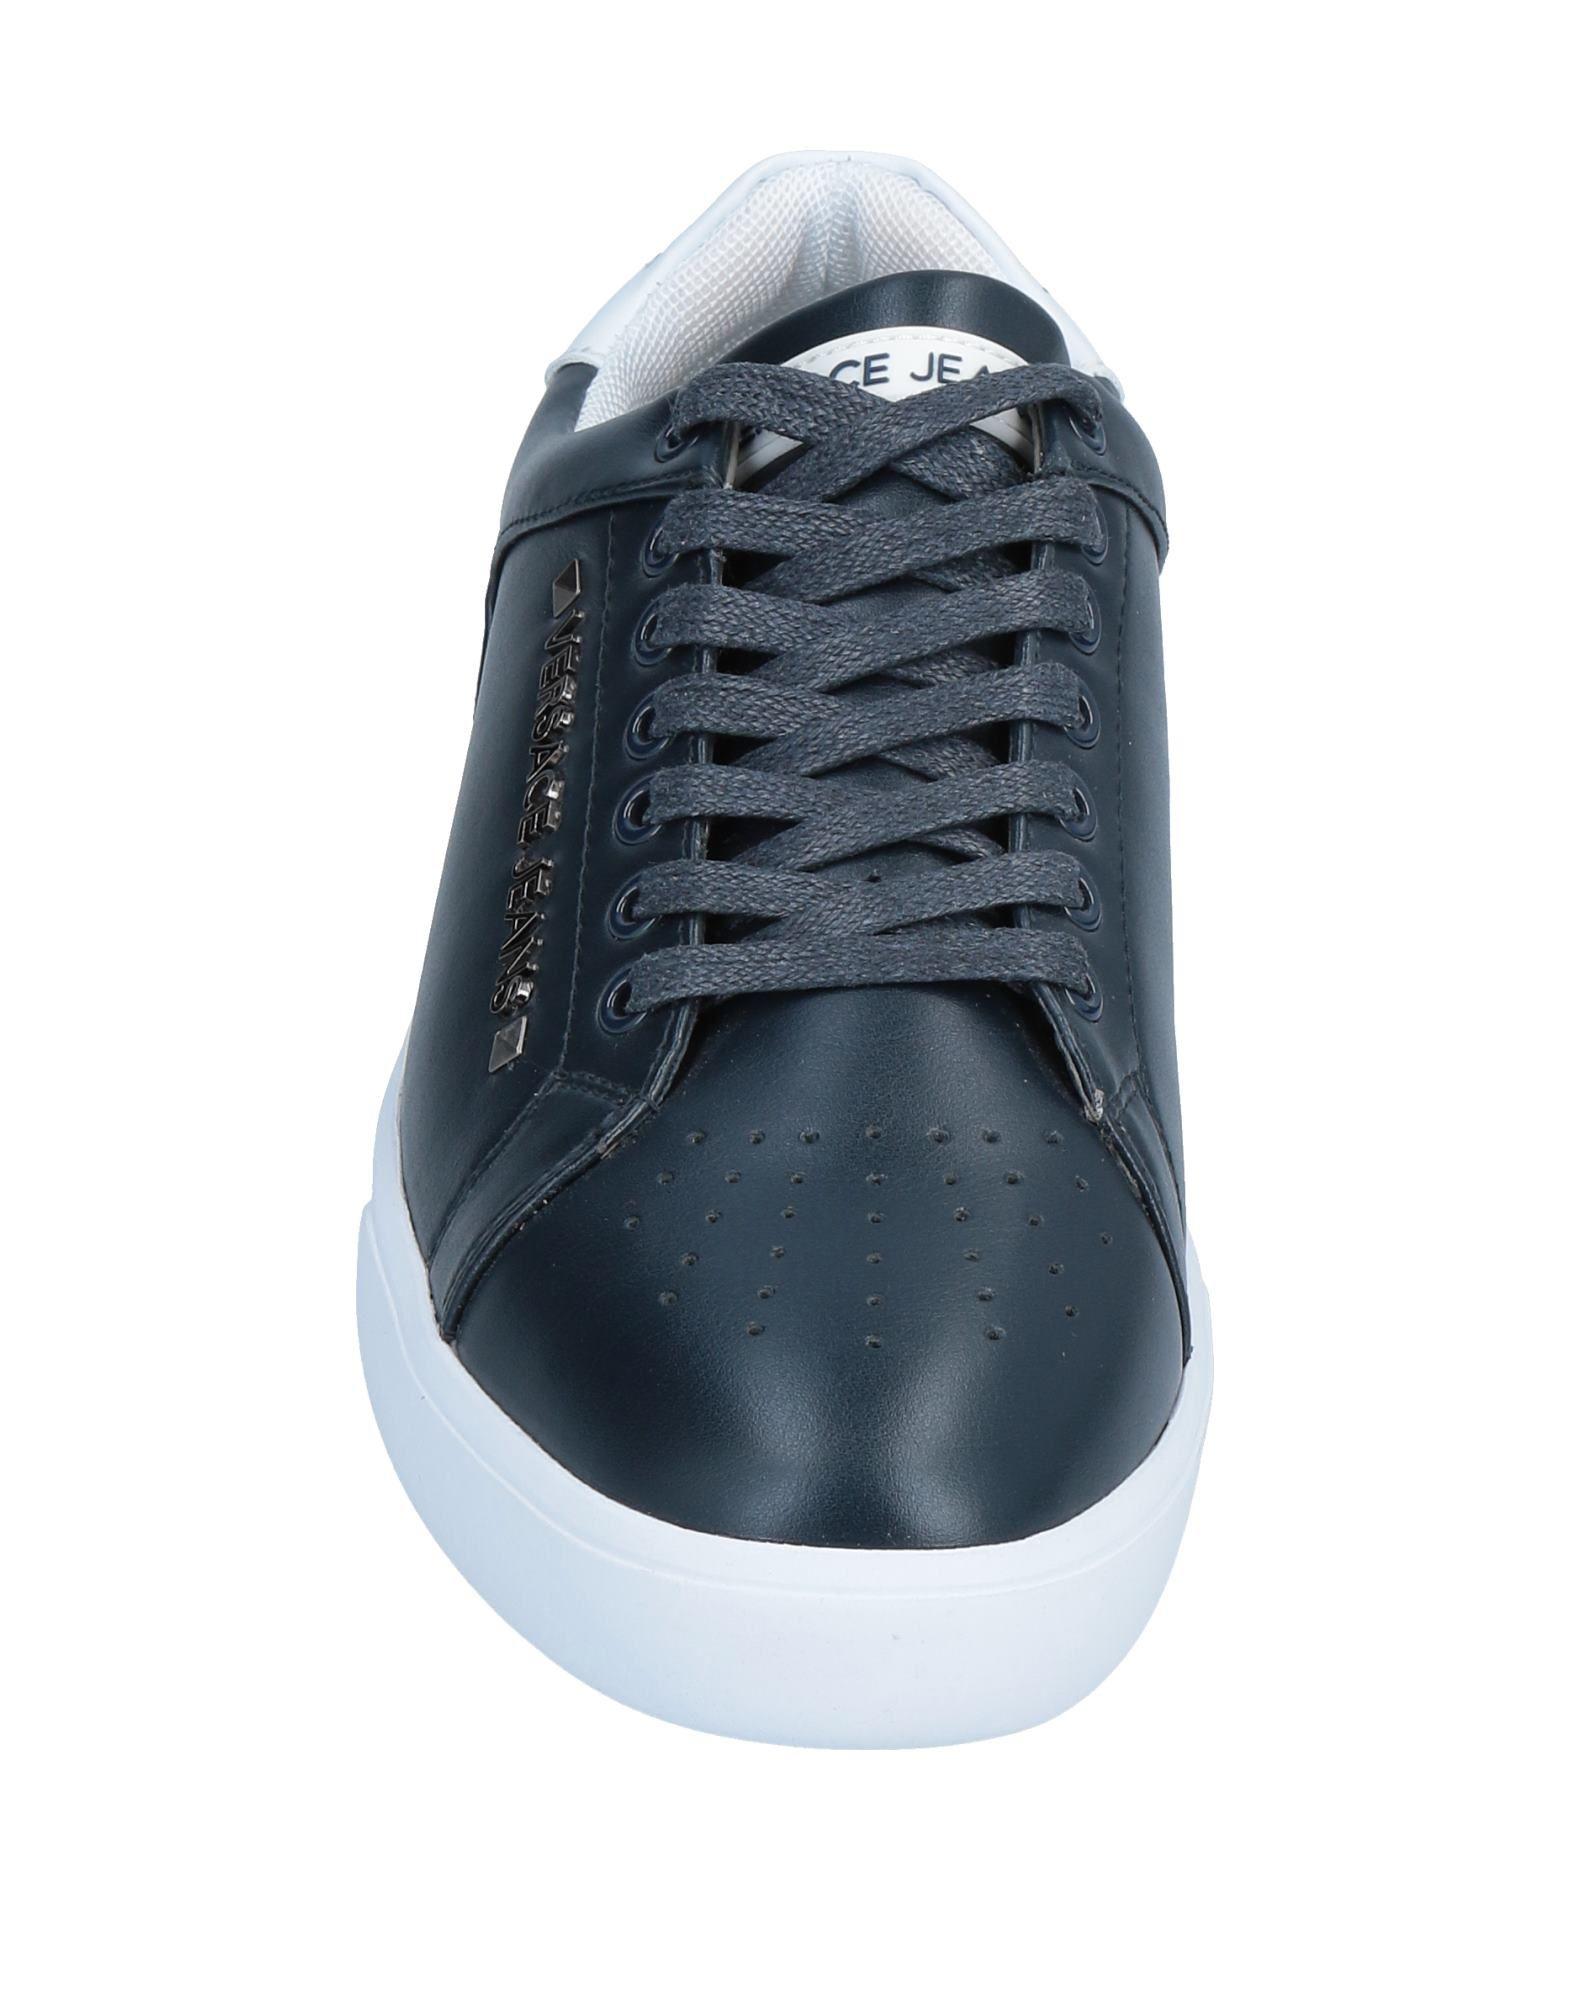 Versace Jeans Leather Low-tops & Sneakers in Dark Blue (Blue) for Men ...